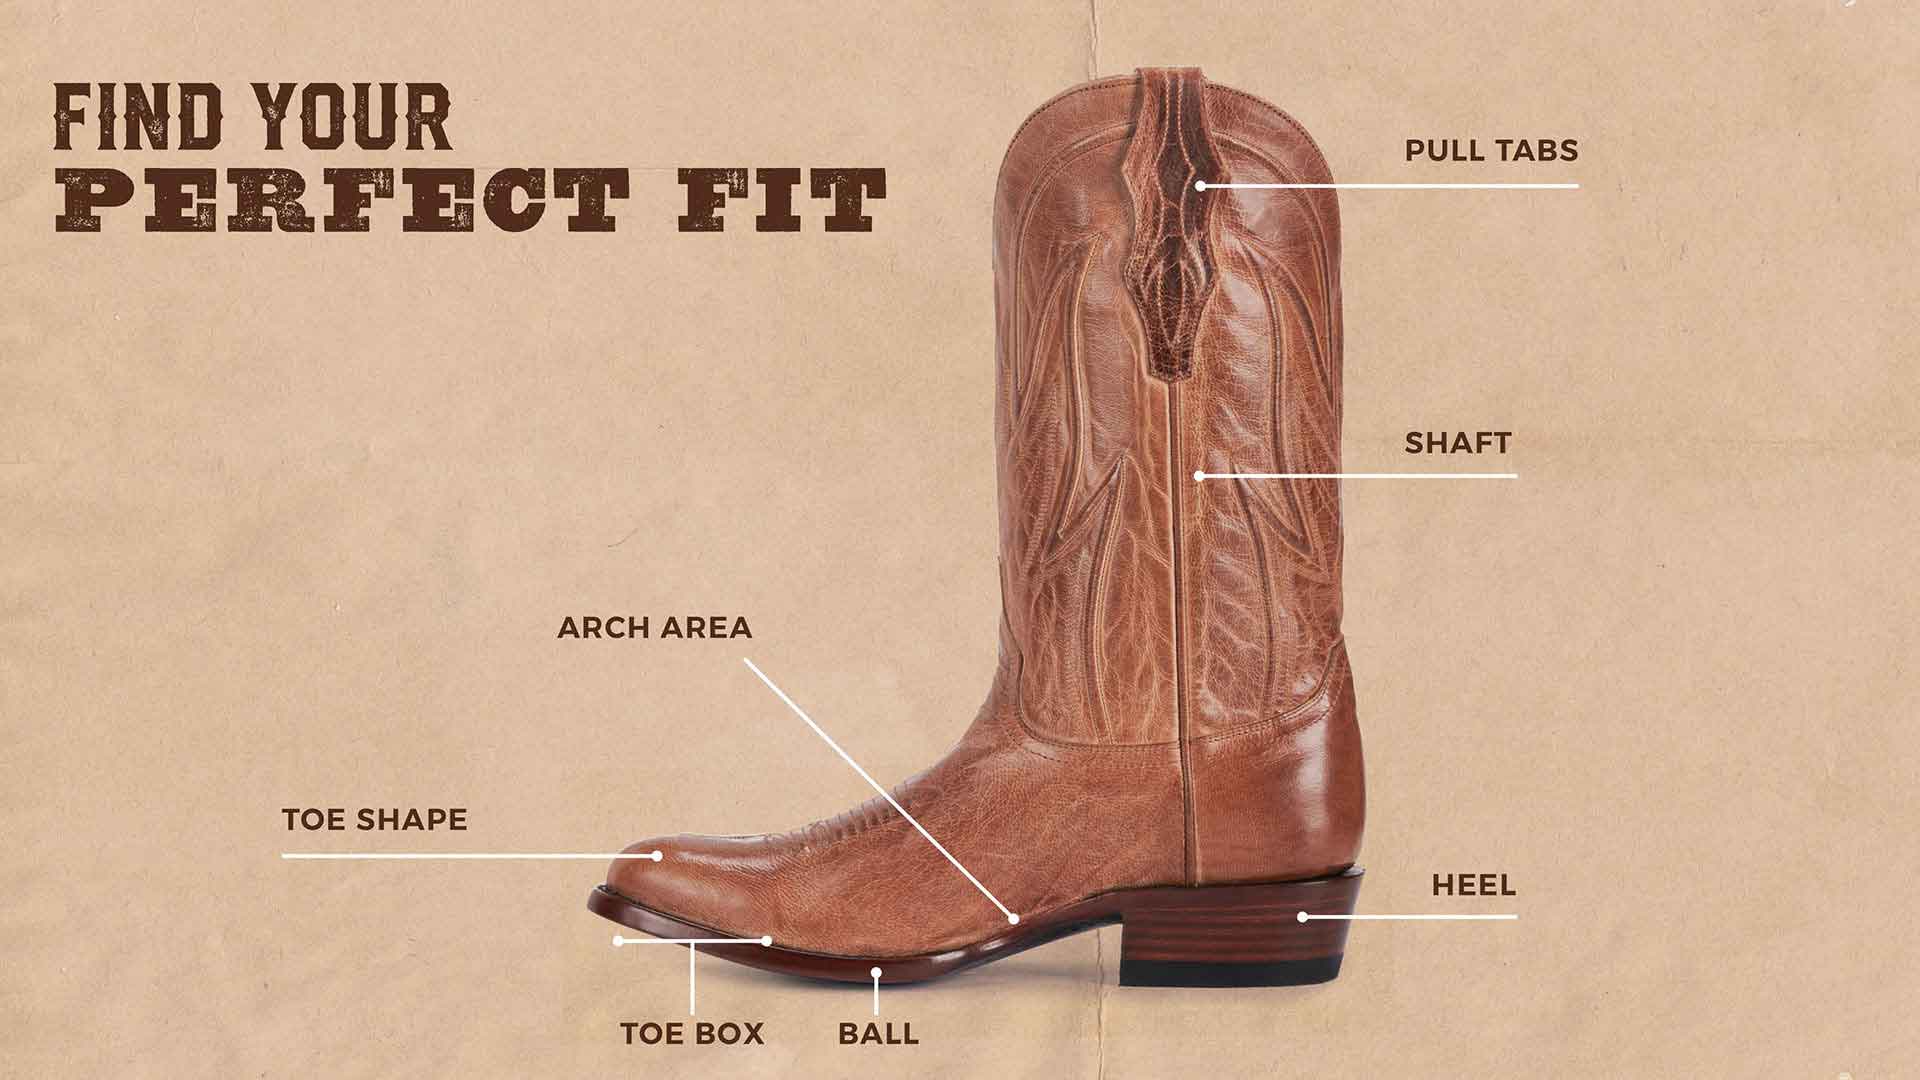 An illustration showing the anatomy of a cowboy boot, labeling its various parts such as the vamp, heel, shaft, and toe box.